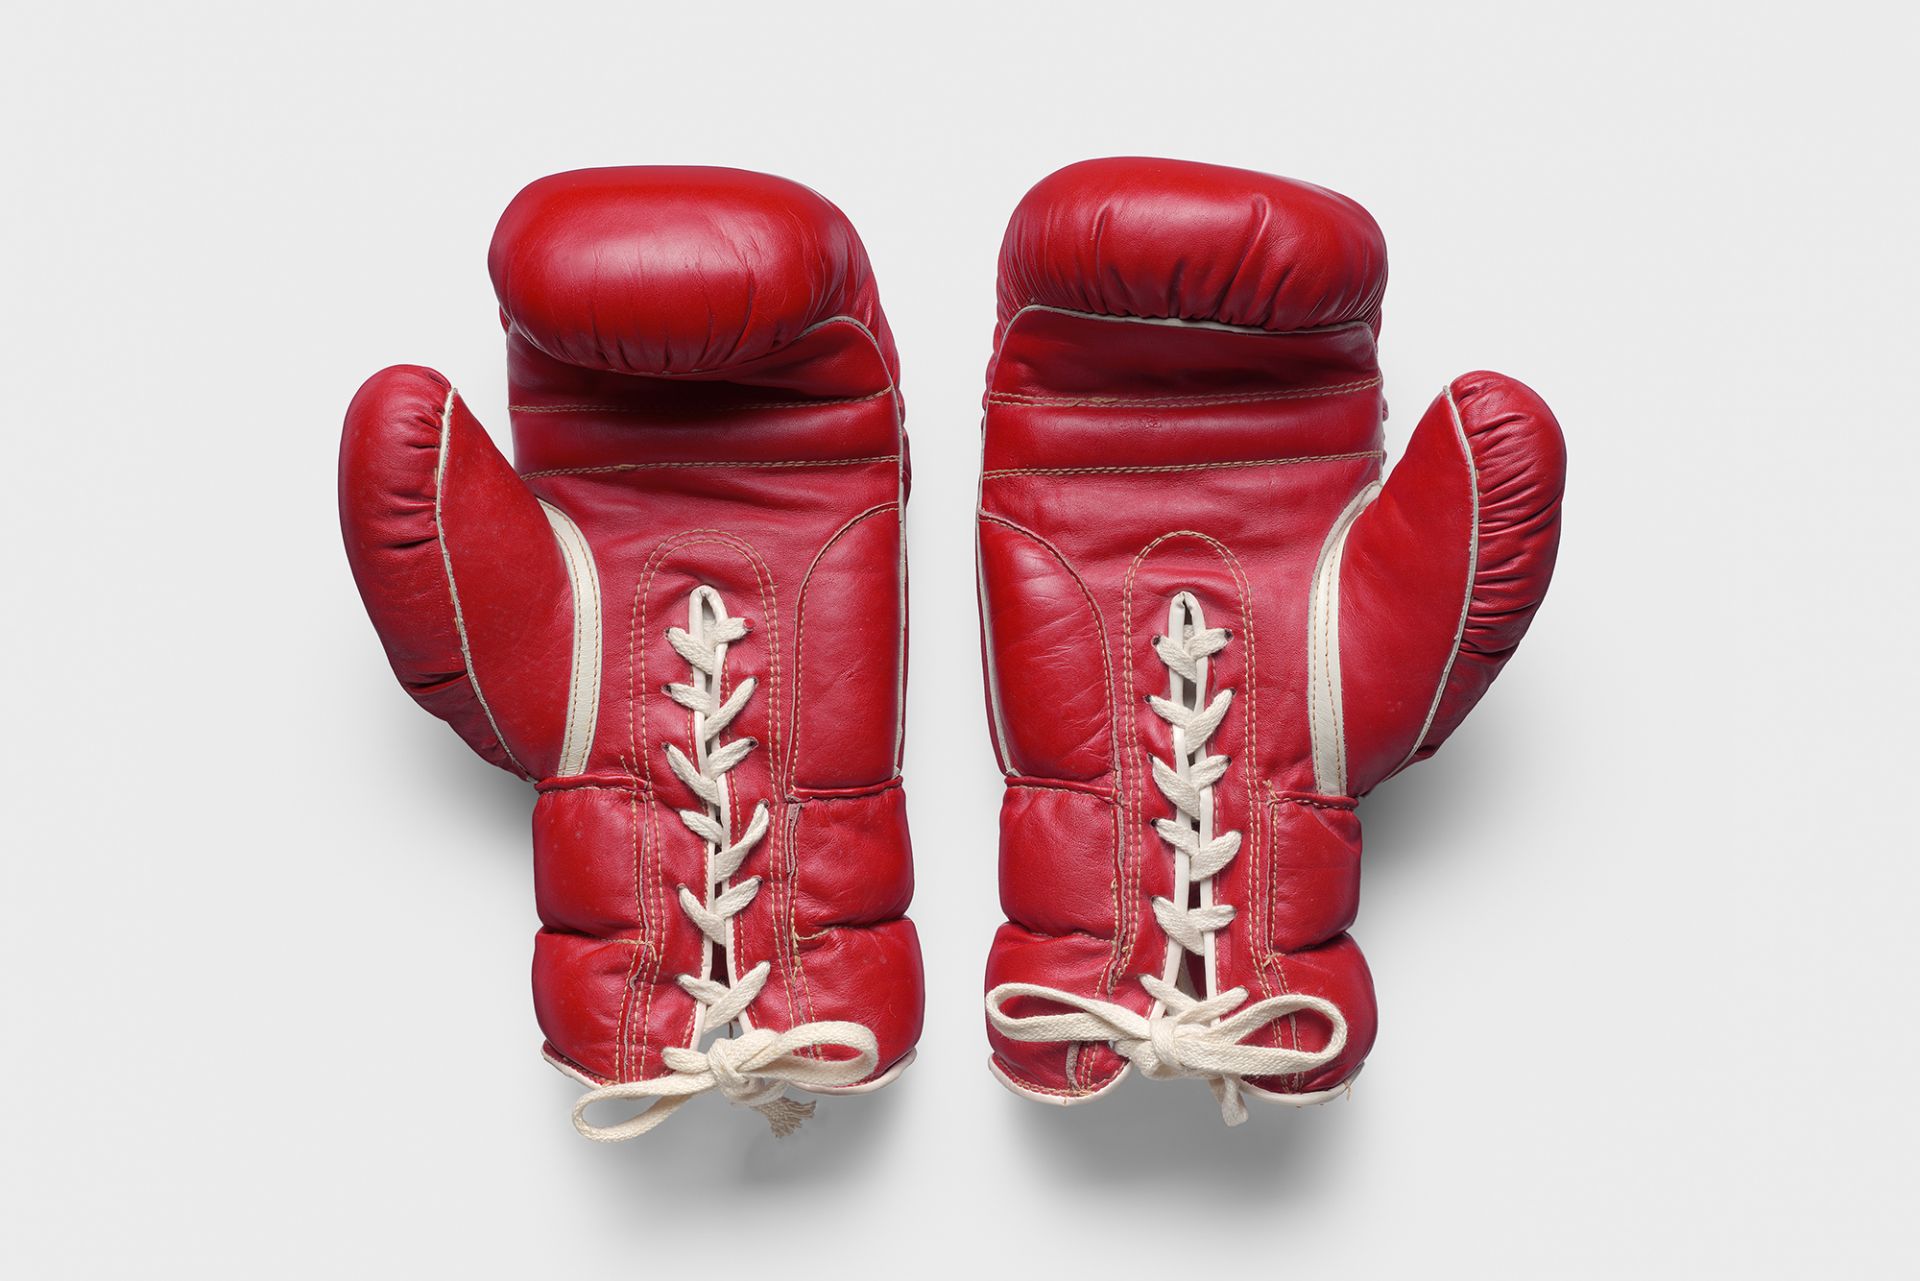 Max Schmeling boxing gloves, Germany, approx. 1970